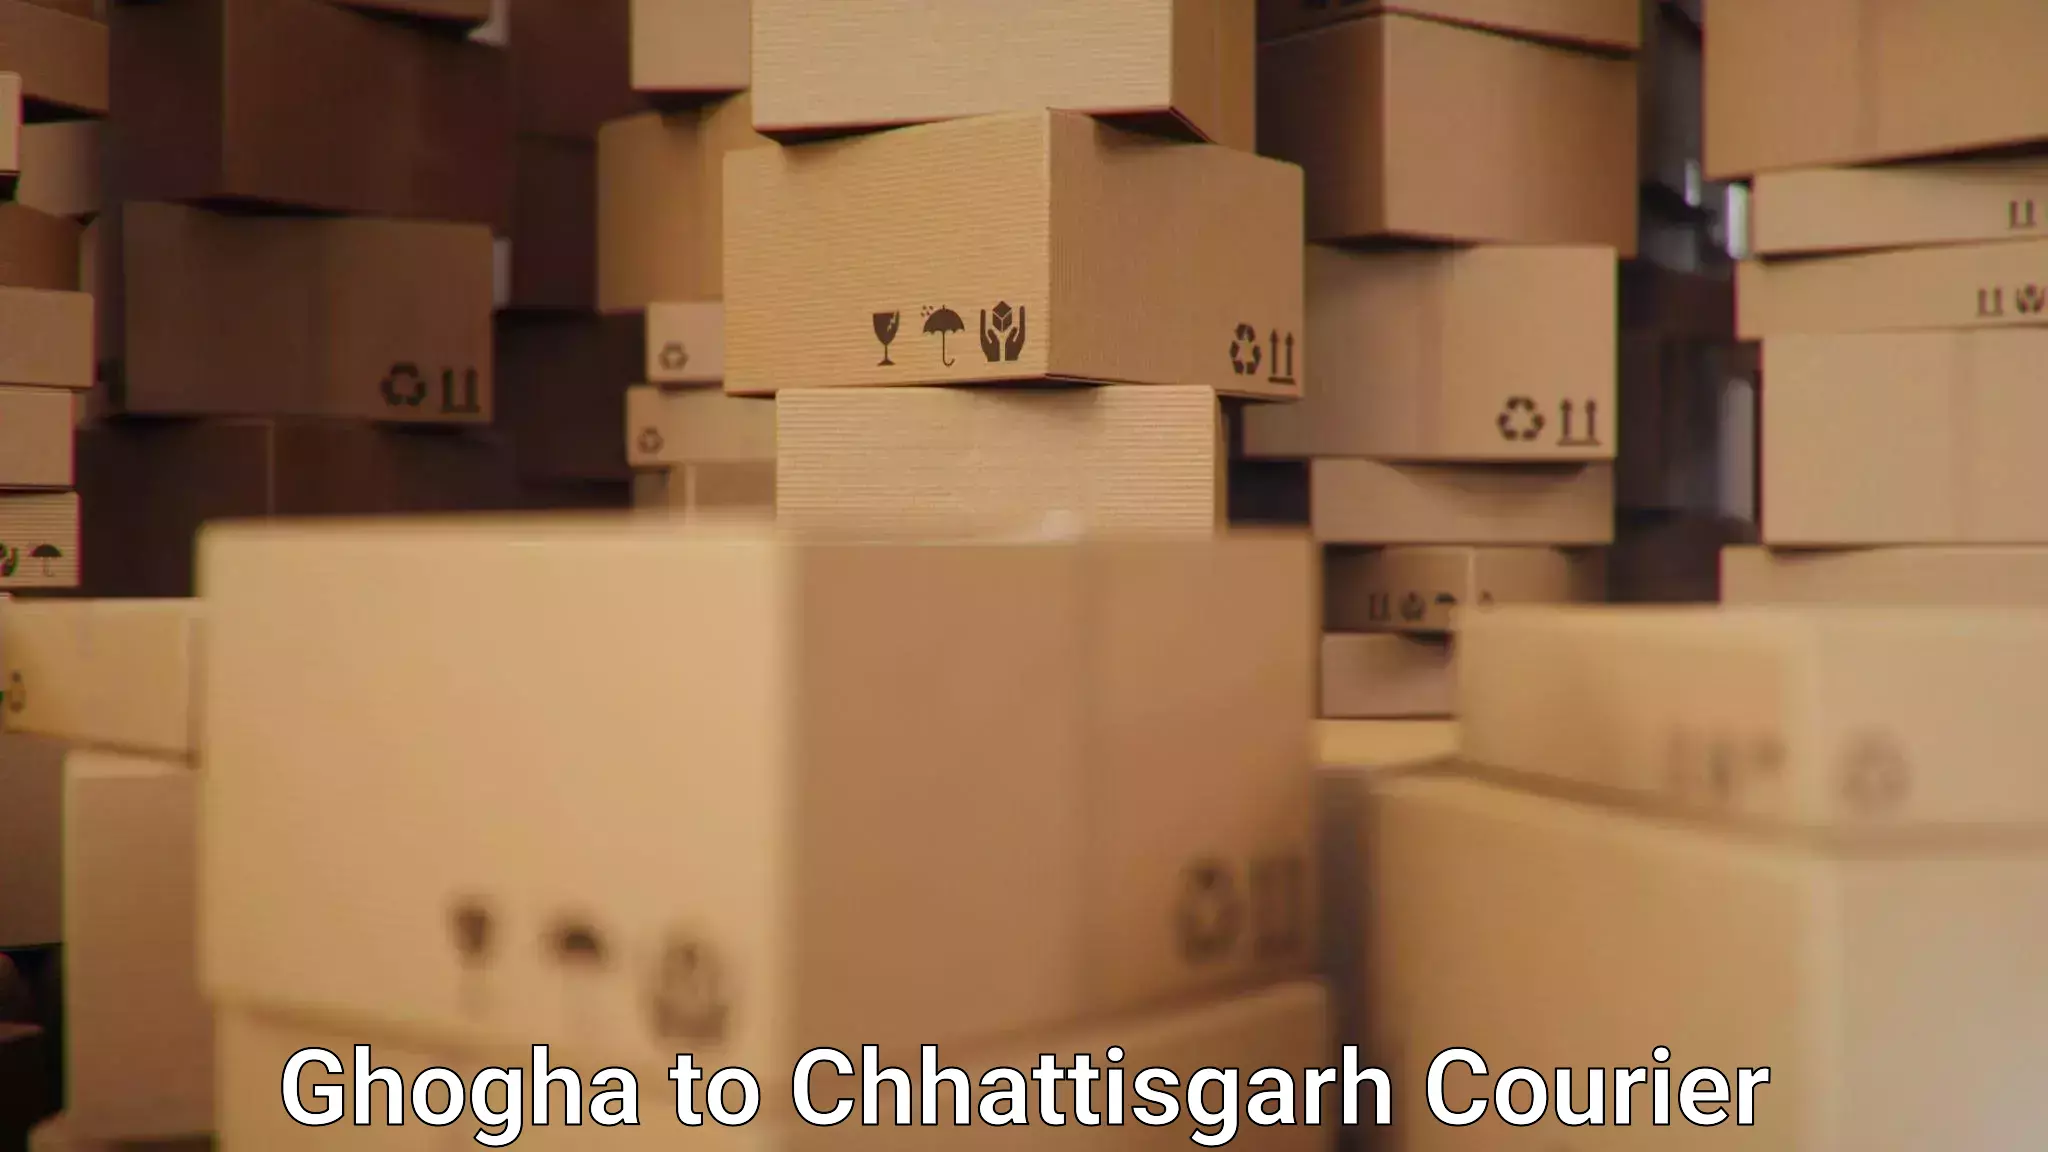 Express delivery capabilities in Ghogha to Chhattisgarh